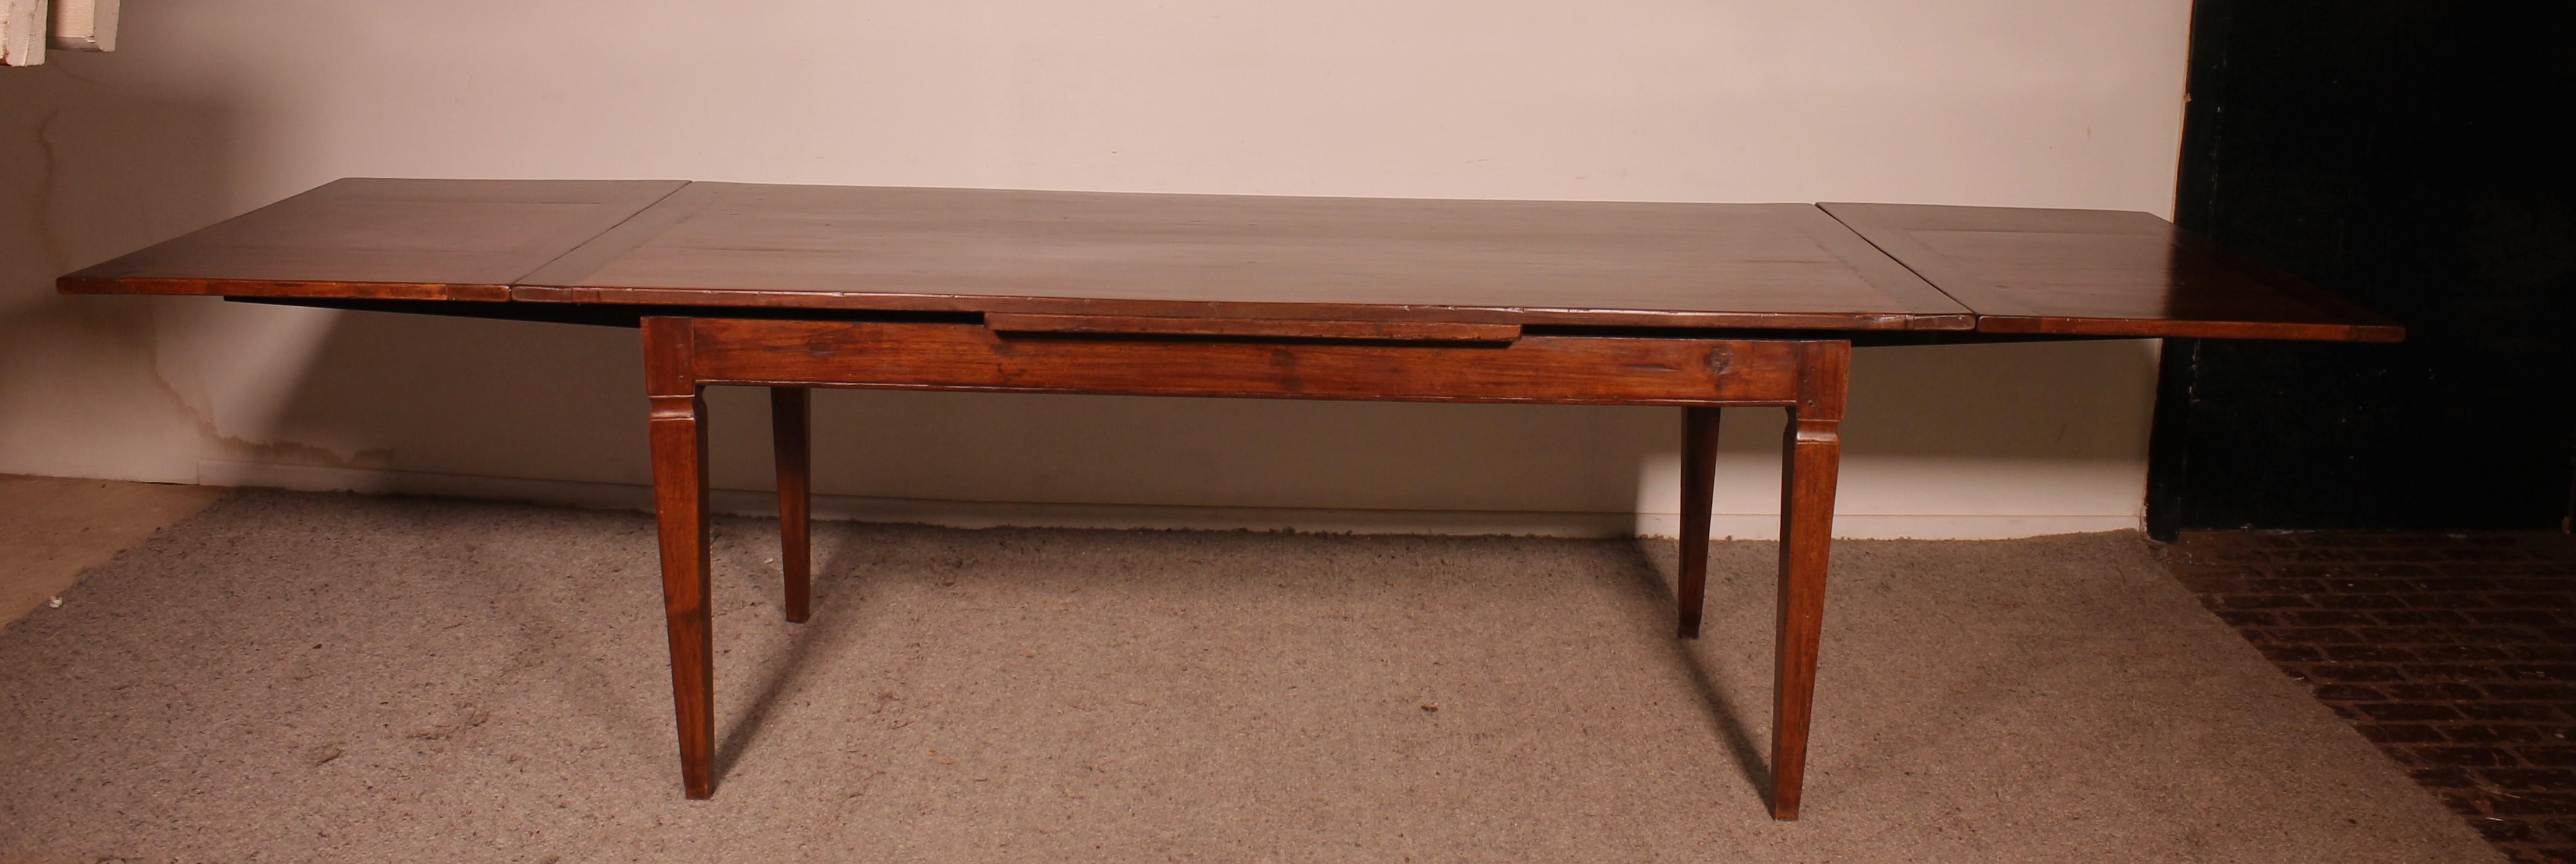 Dutch Refectory Table From The 19th Century For Sale 4